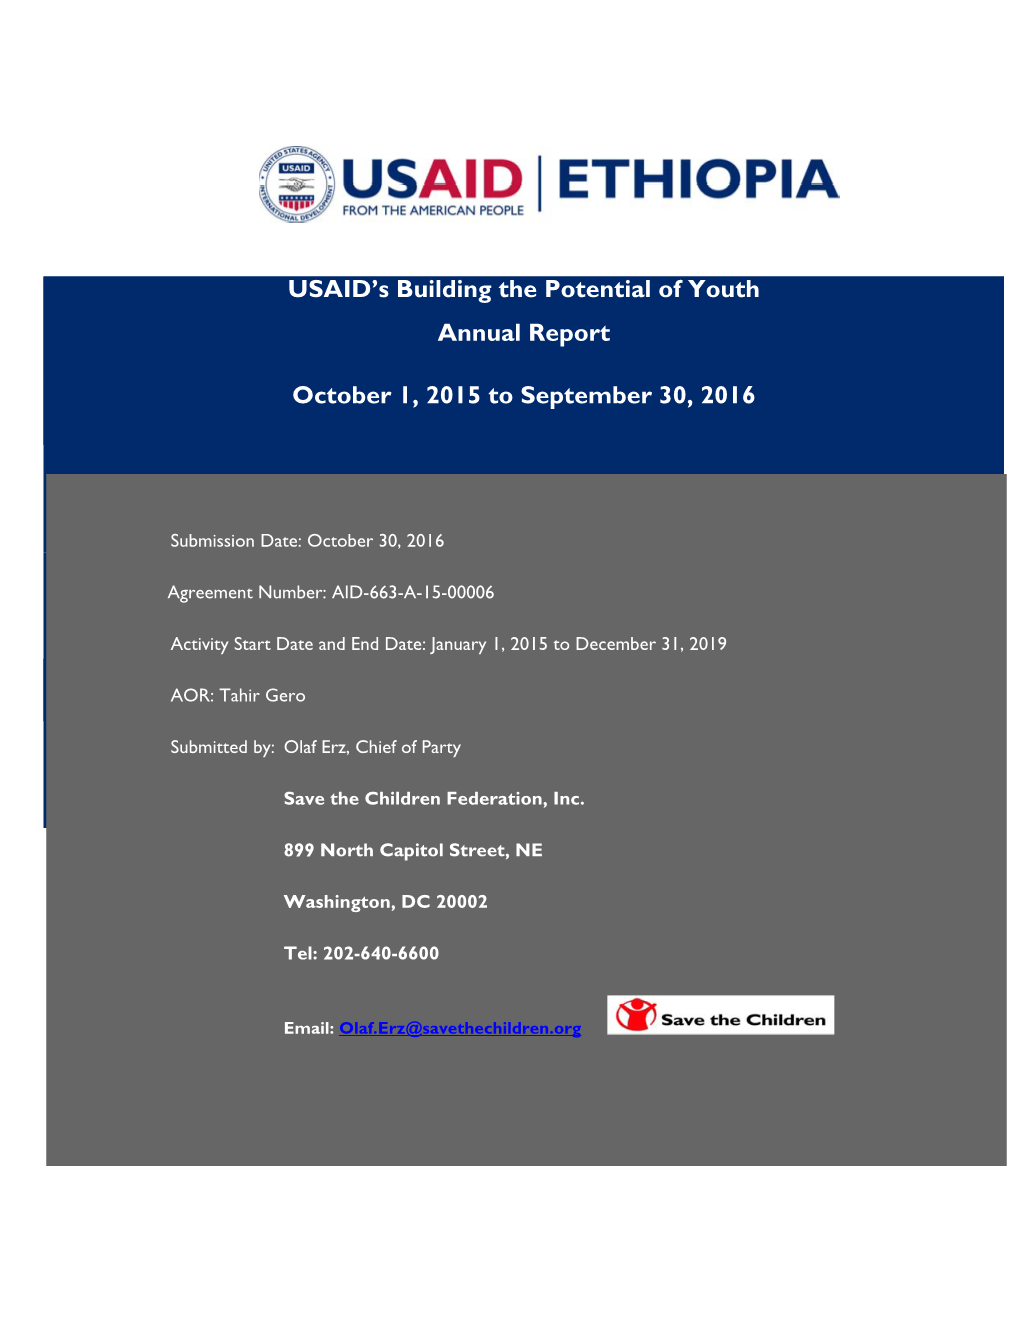 USAID's Building the Potential of Youth Annual Report October 1, 2015 to September 30, 2016